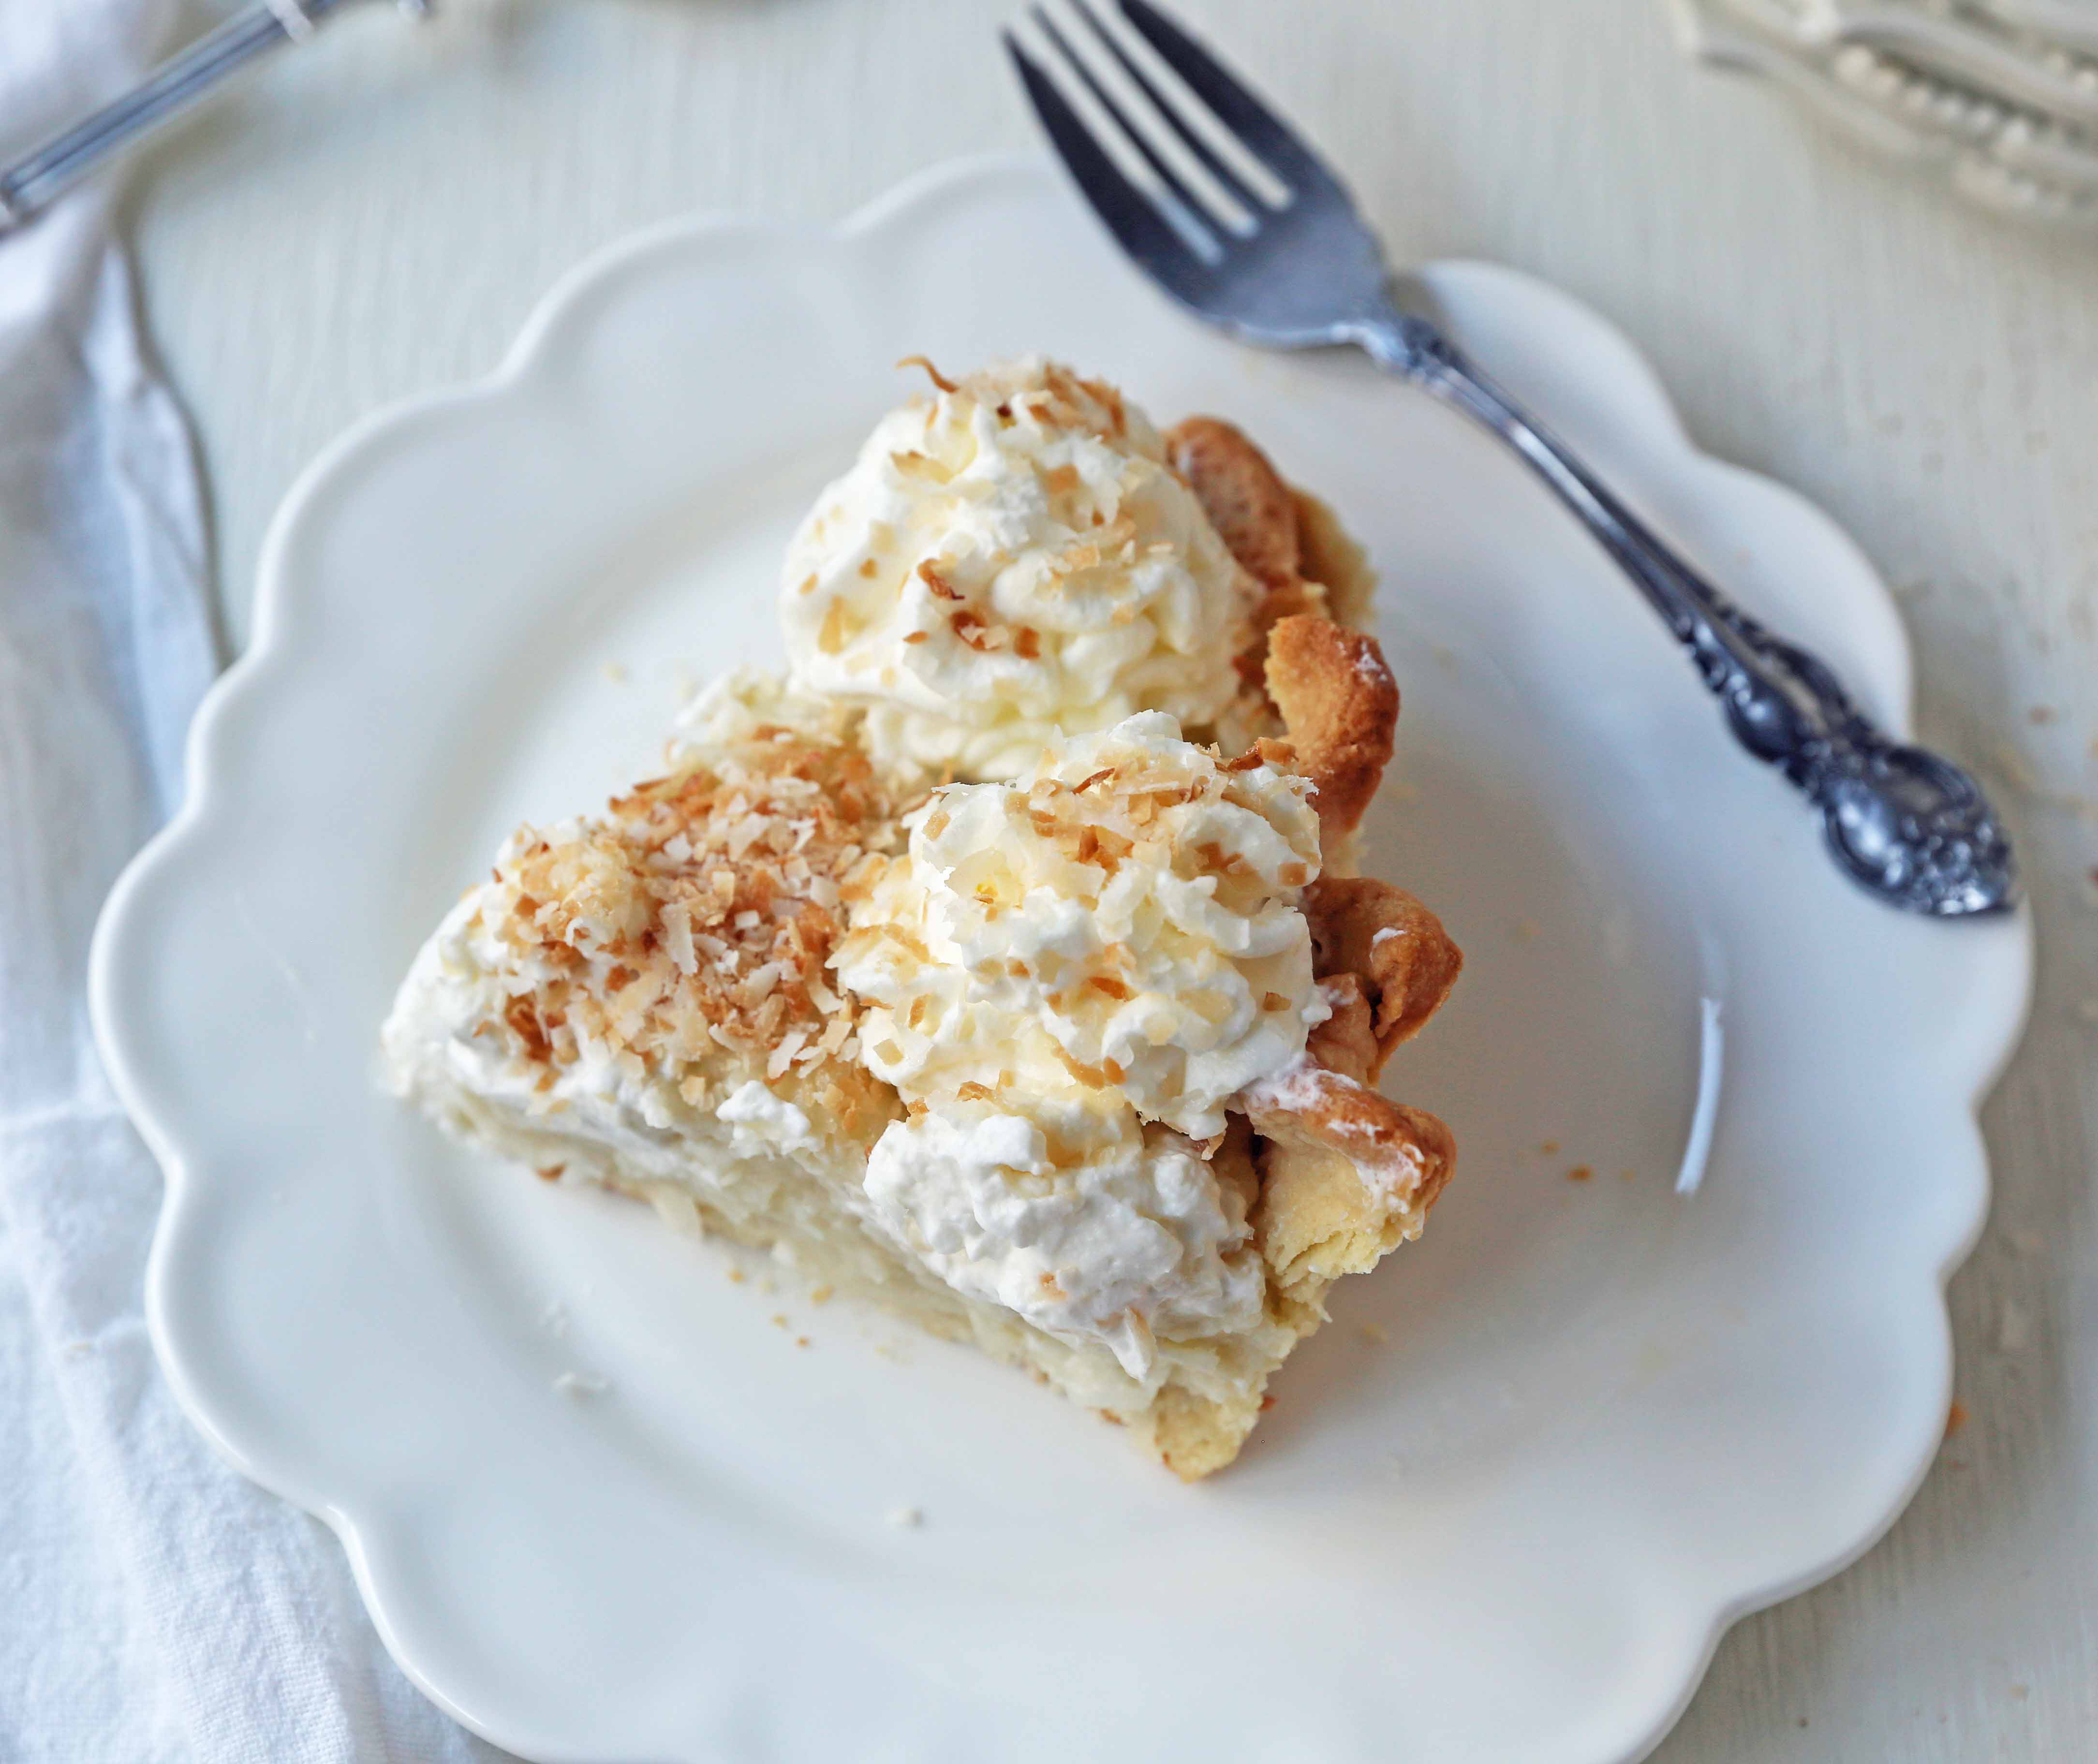 Coconut Cream Pie. A homemade coconut custard filling in a buttery pie crust topped with fresh whipped cream and toasted coconut. www.modernhoney.com #coconutcreampie #coconutpie #pie 